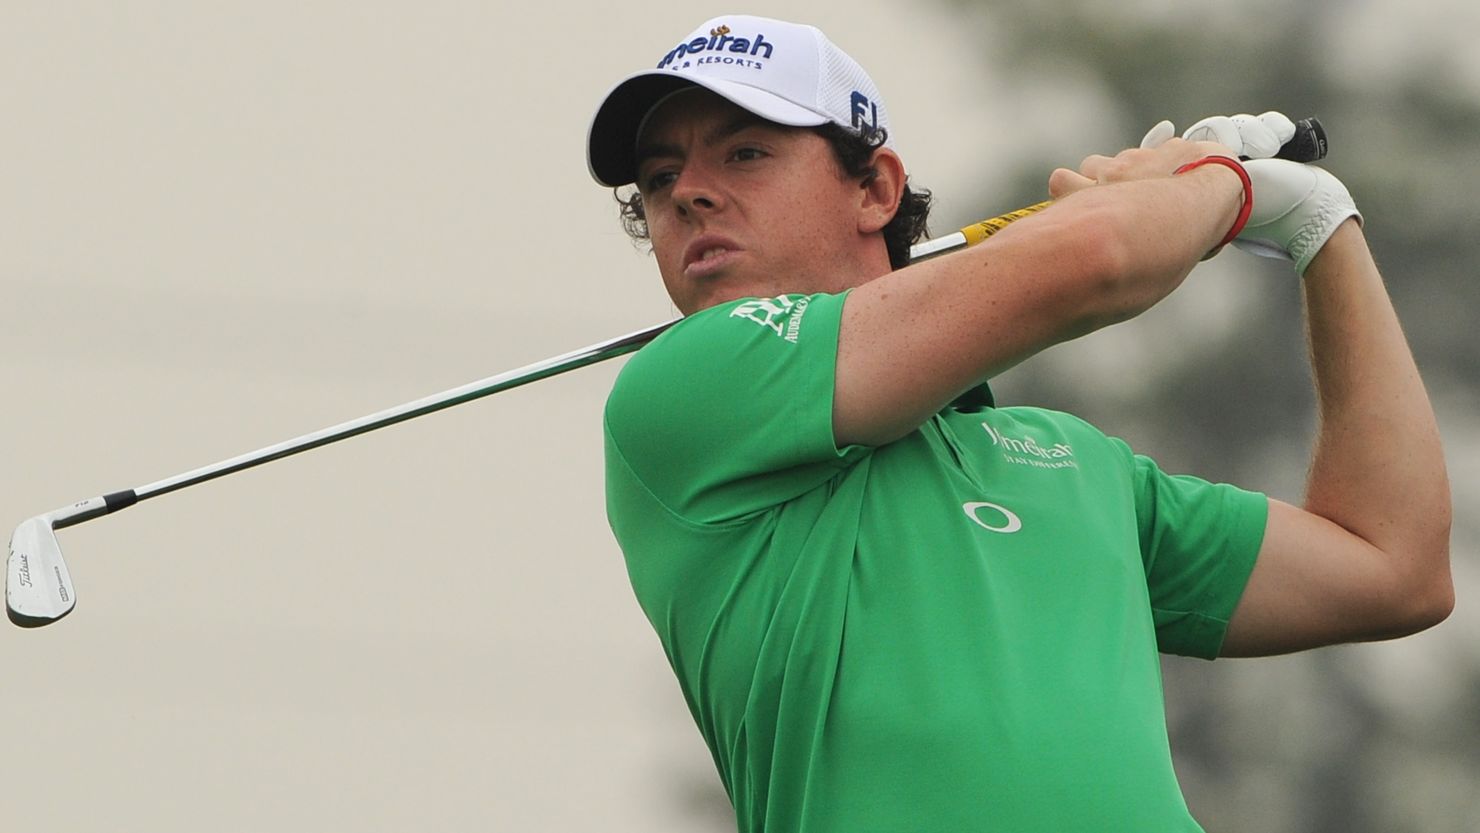 Northern Ireland's Rory McIlroy has been top of the world rankings since May's Wells Fargo Championship.